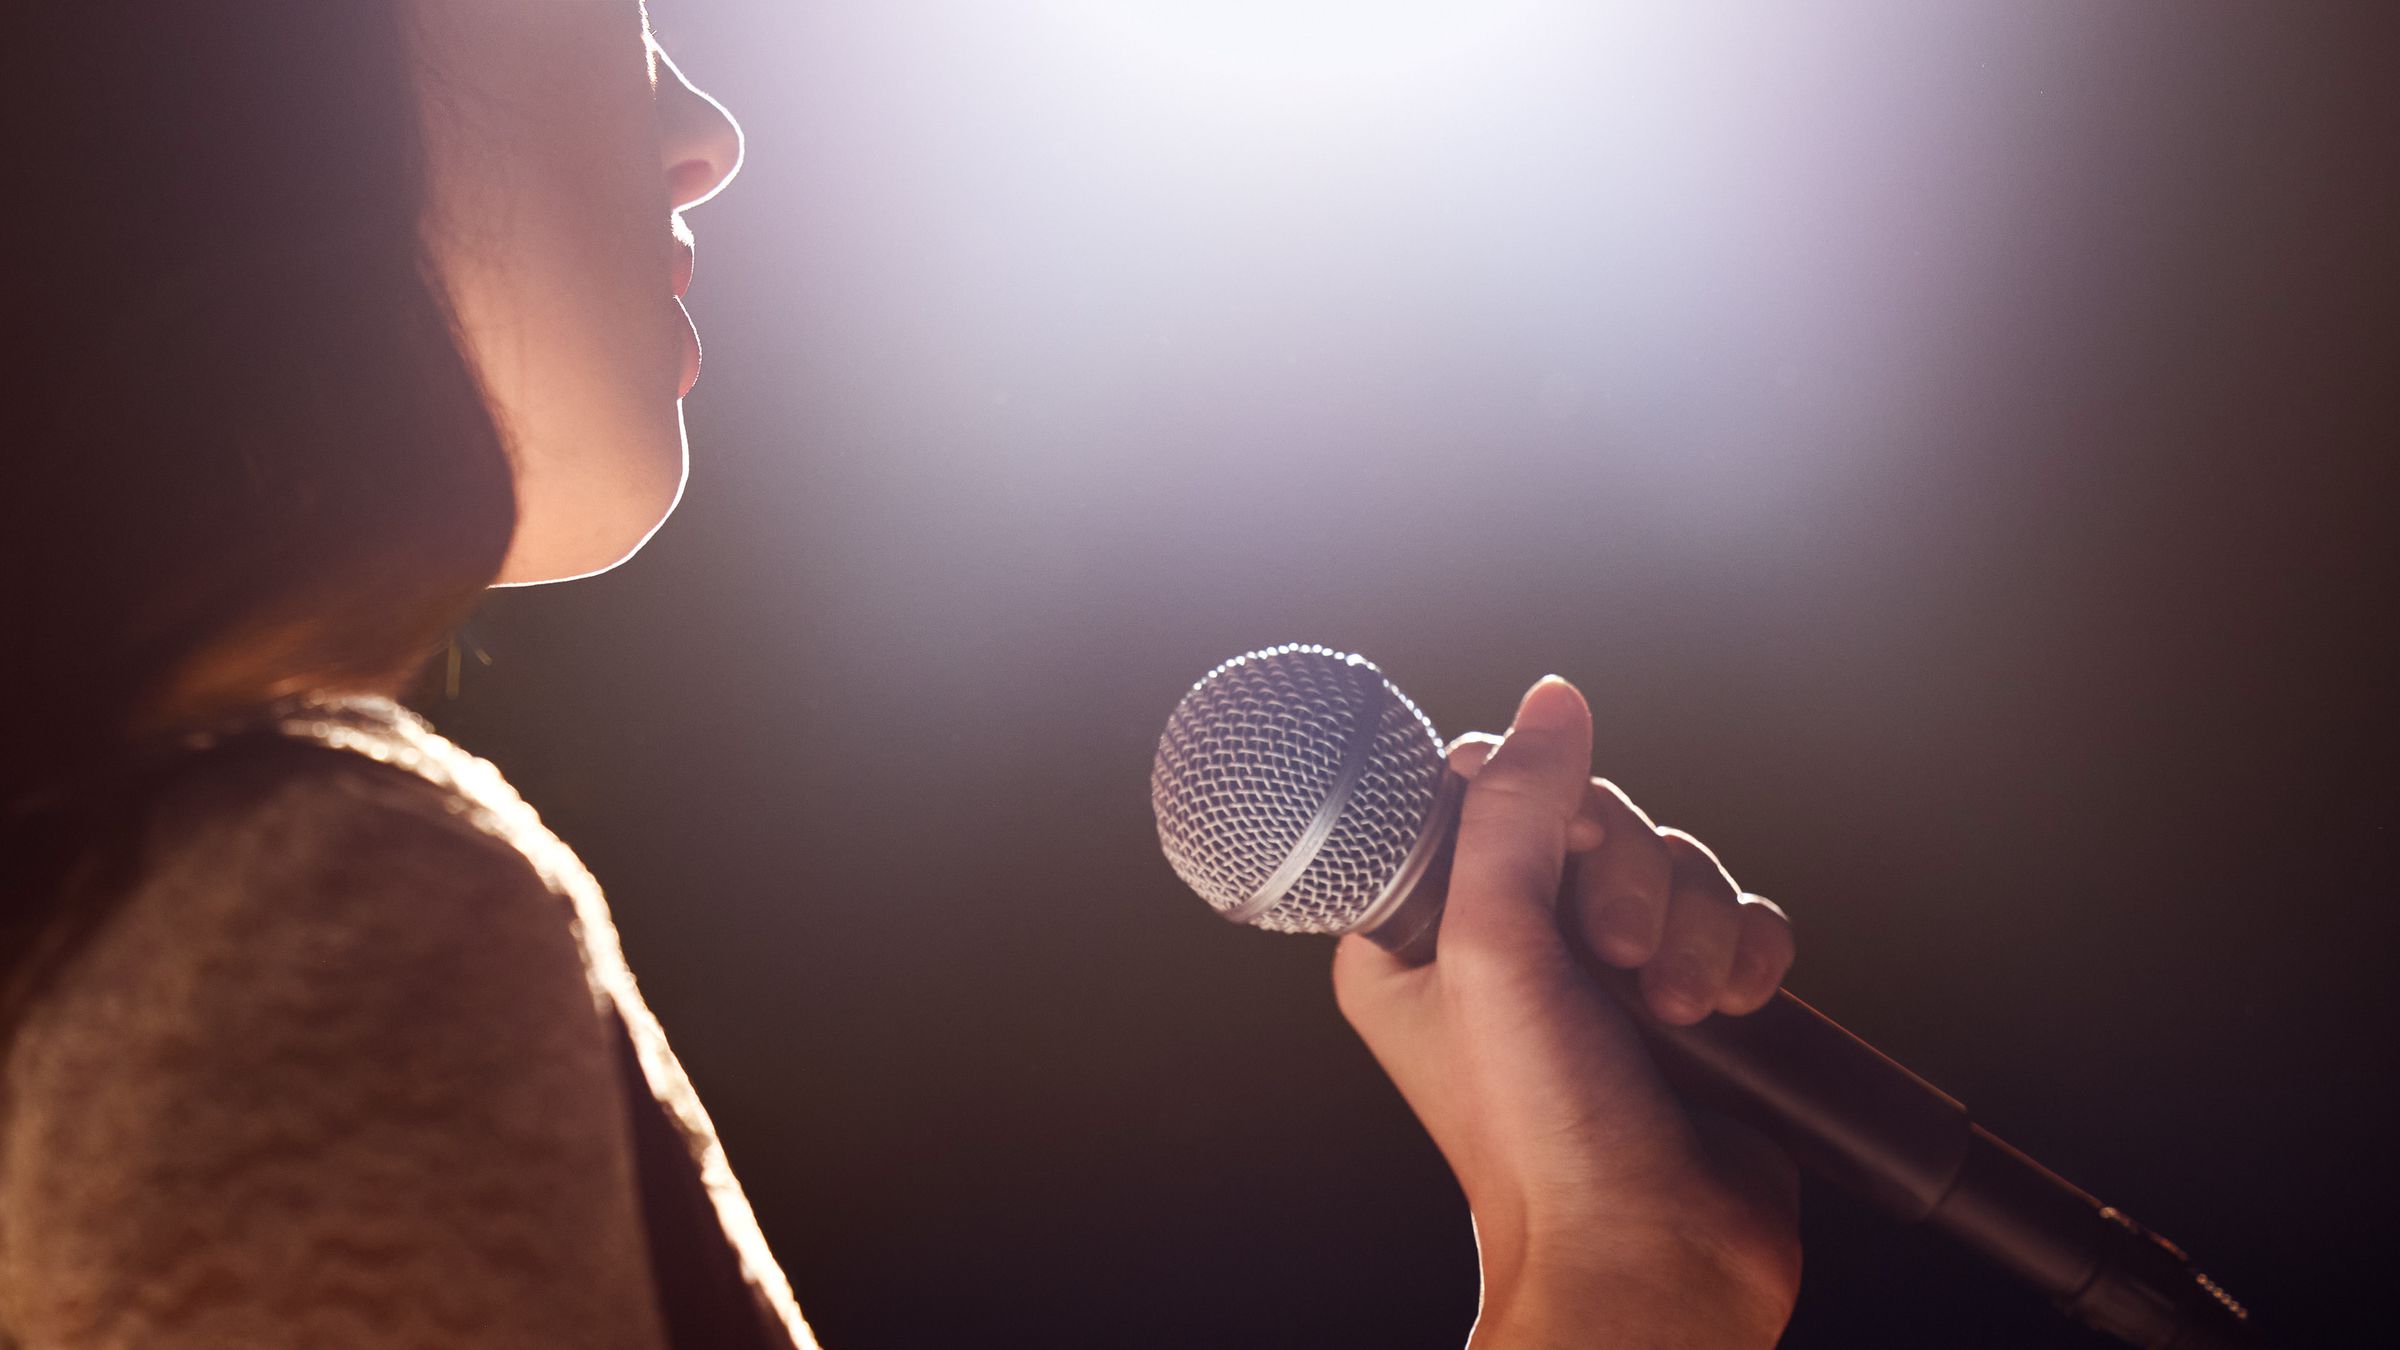 Someone singing into a microphone shown from behind with face obscured